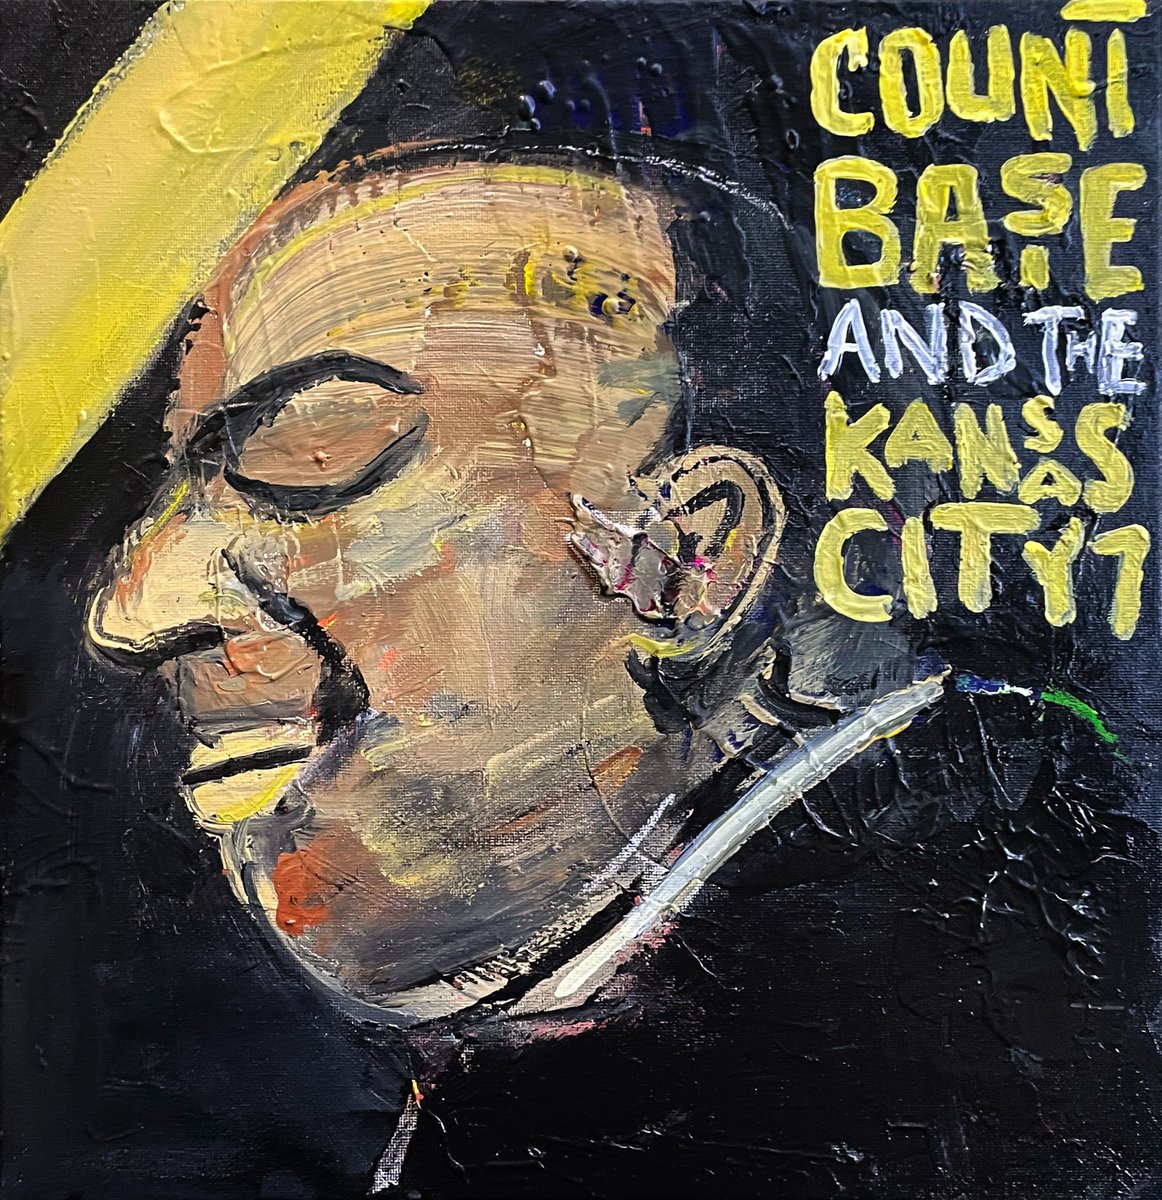 Count Basie

#countbasie